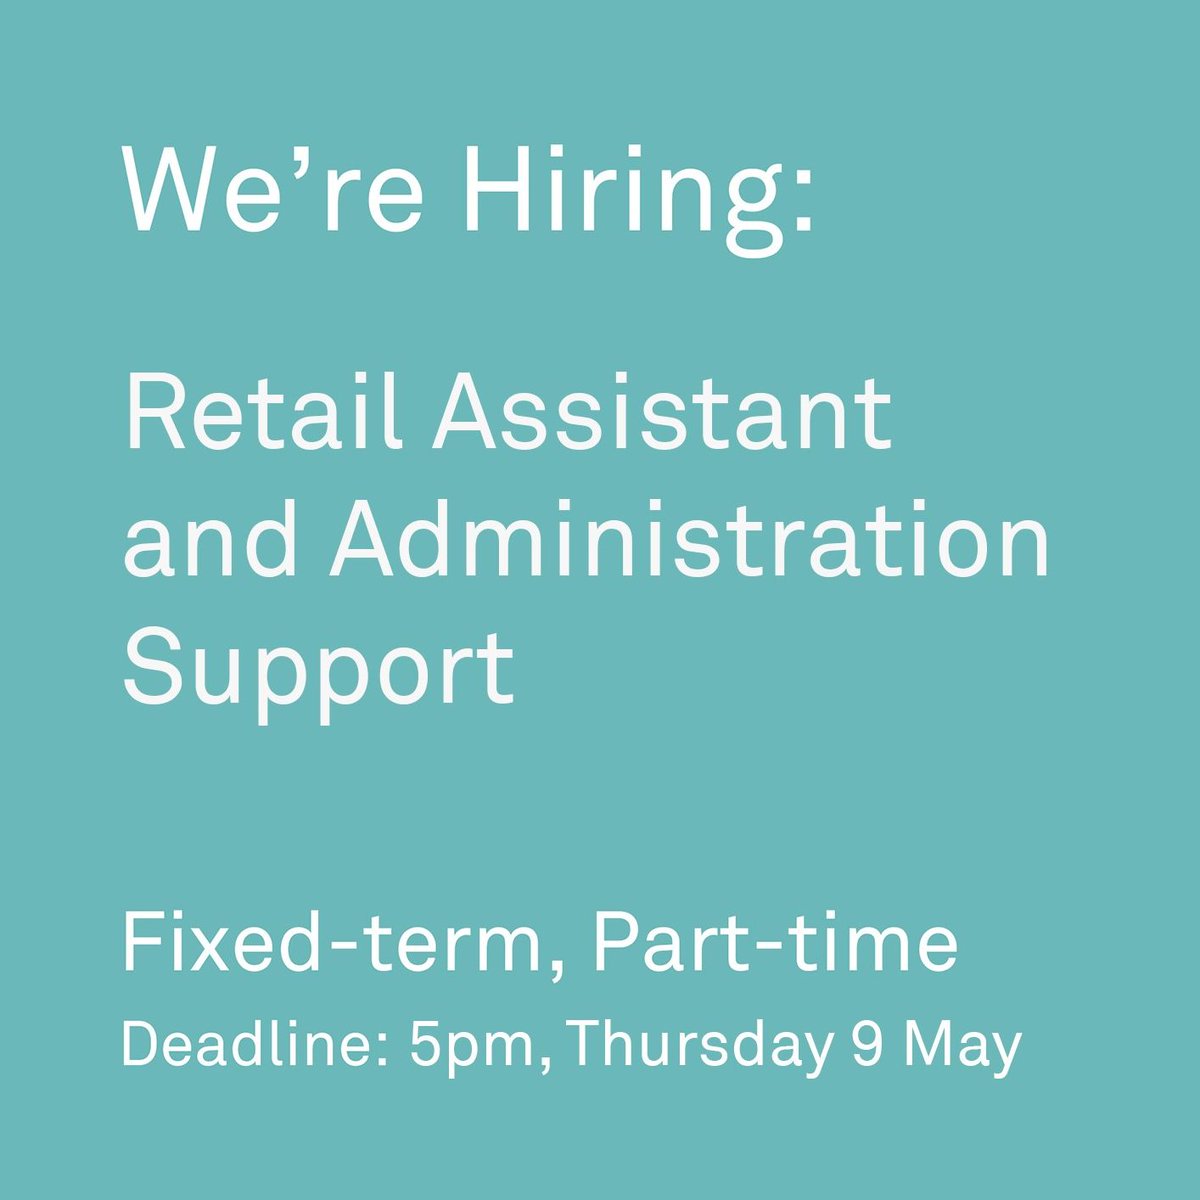 We're currently recruiting for this exciting new role:⁠ ⁠ ‣ Retail Assistant and Administration Support, Fixed-Term, Part-time Deadline: 5pm Thursday 9 May 2024 To learn more, visit: l8r.it/LyWX #margate #hiring #parttime #recruiting #artsjobs #creativejobs